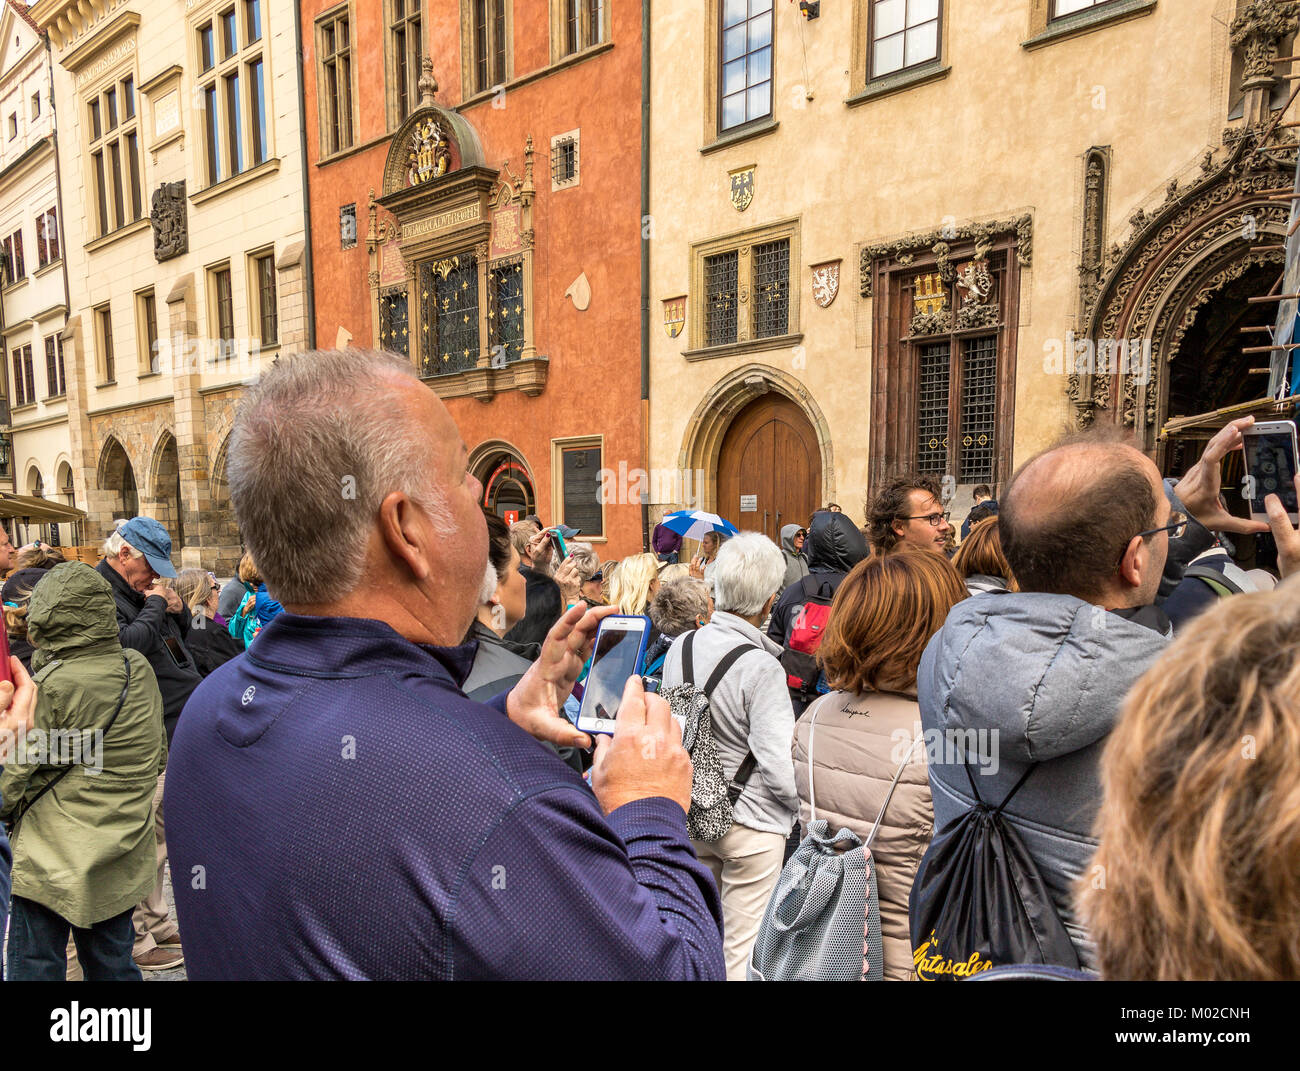 A man plays with his mobile phone amongst the crowds gathered for the on the hour mechanical performance of Prague's Astronomical clock Stock Photo